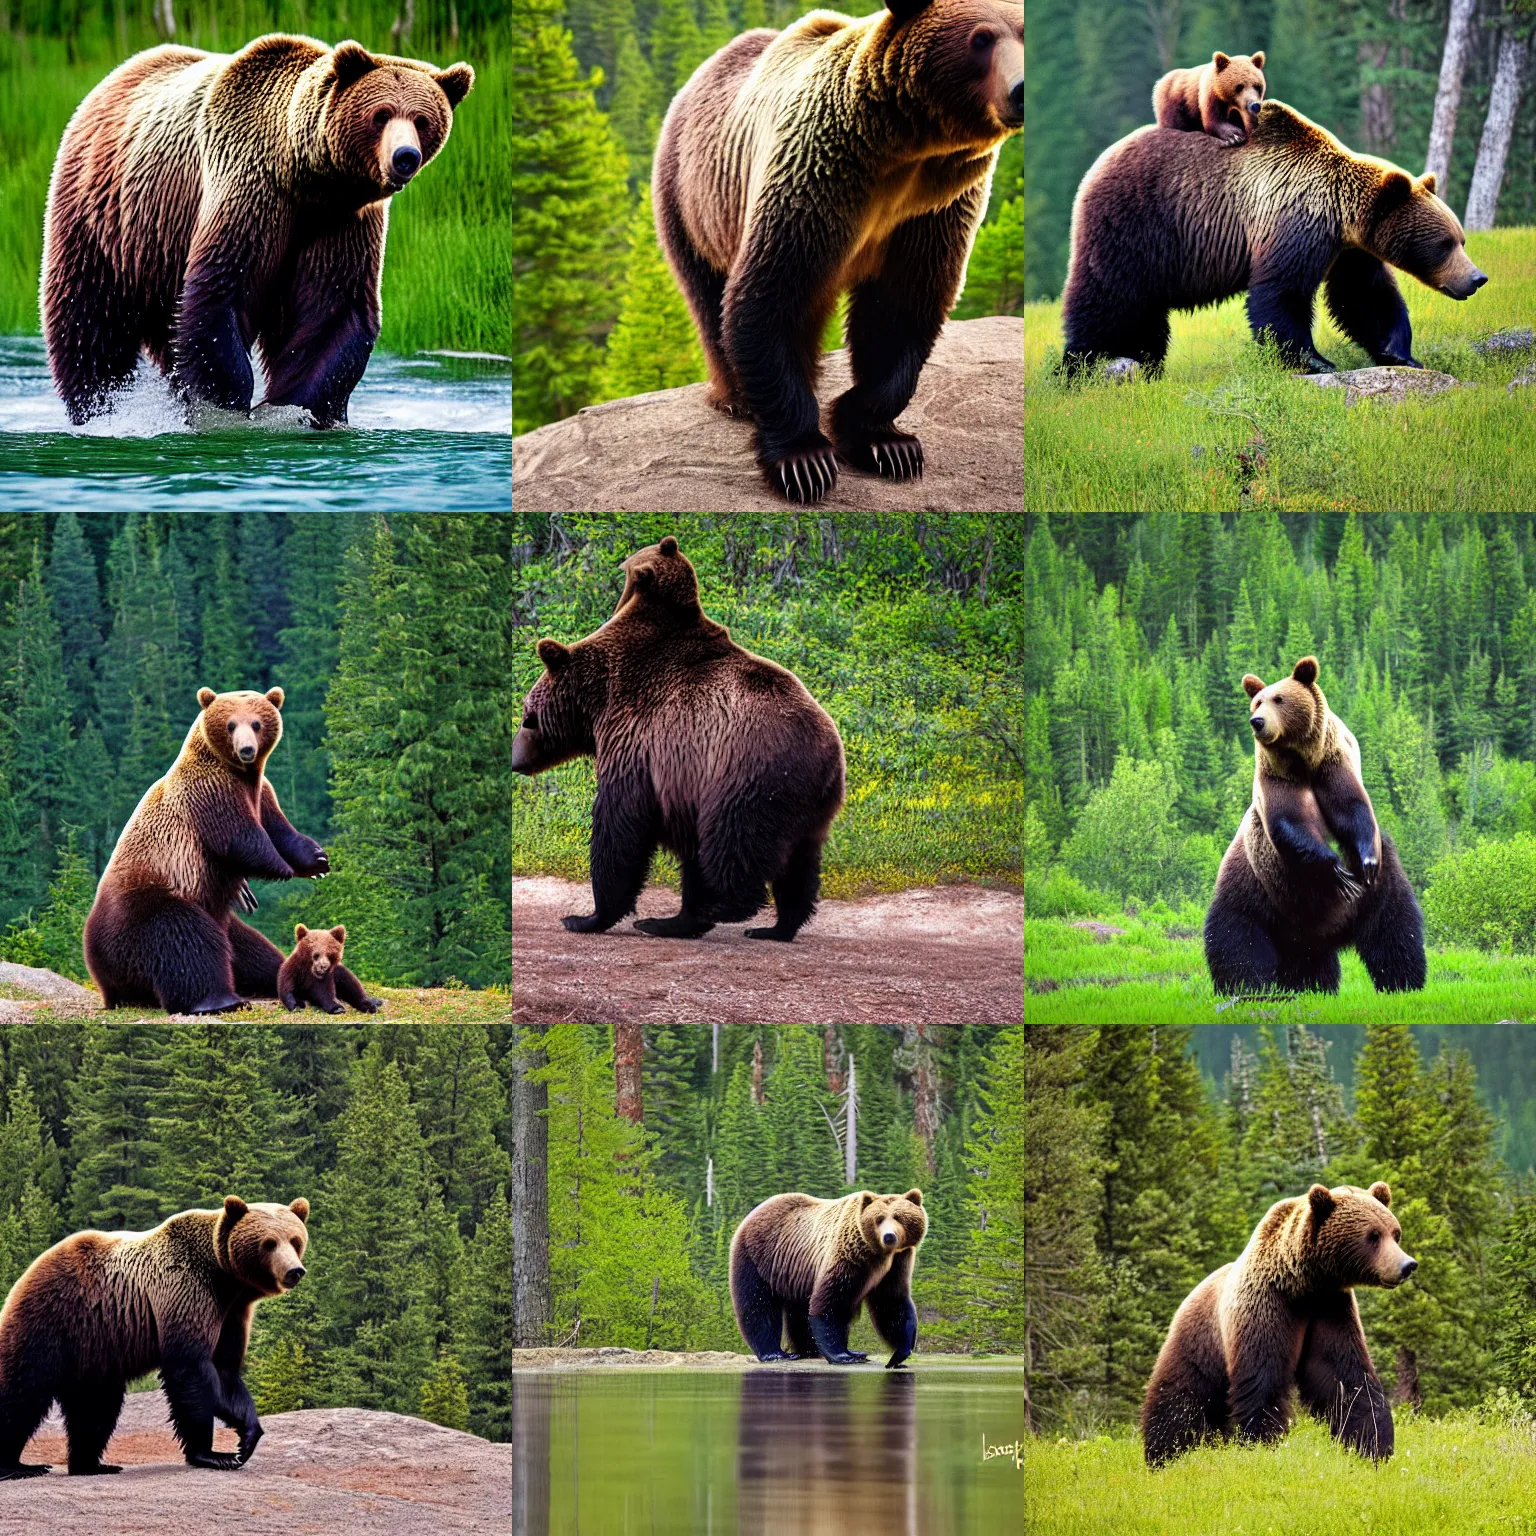 Prompt: a big grizzly bear is standing on his legs, the bear is wearing a green backpack, backpack on the bear's shoulders, nature photography, imax, 3 5 mm, professional photograph, national geographic